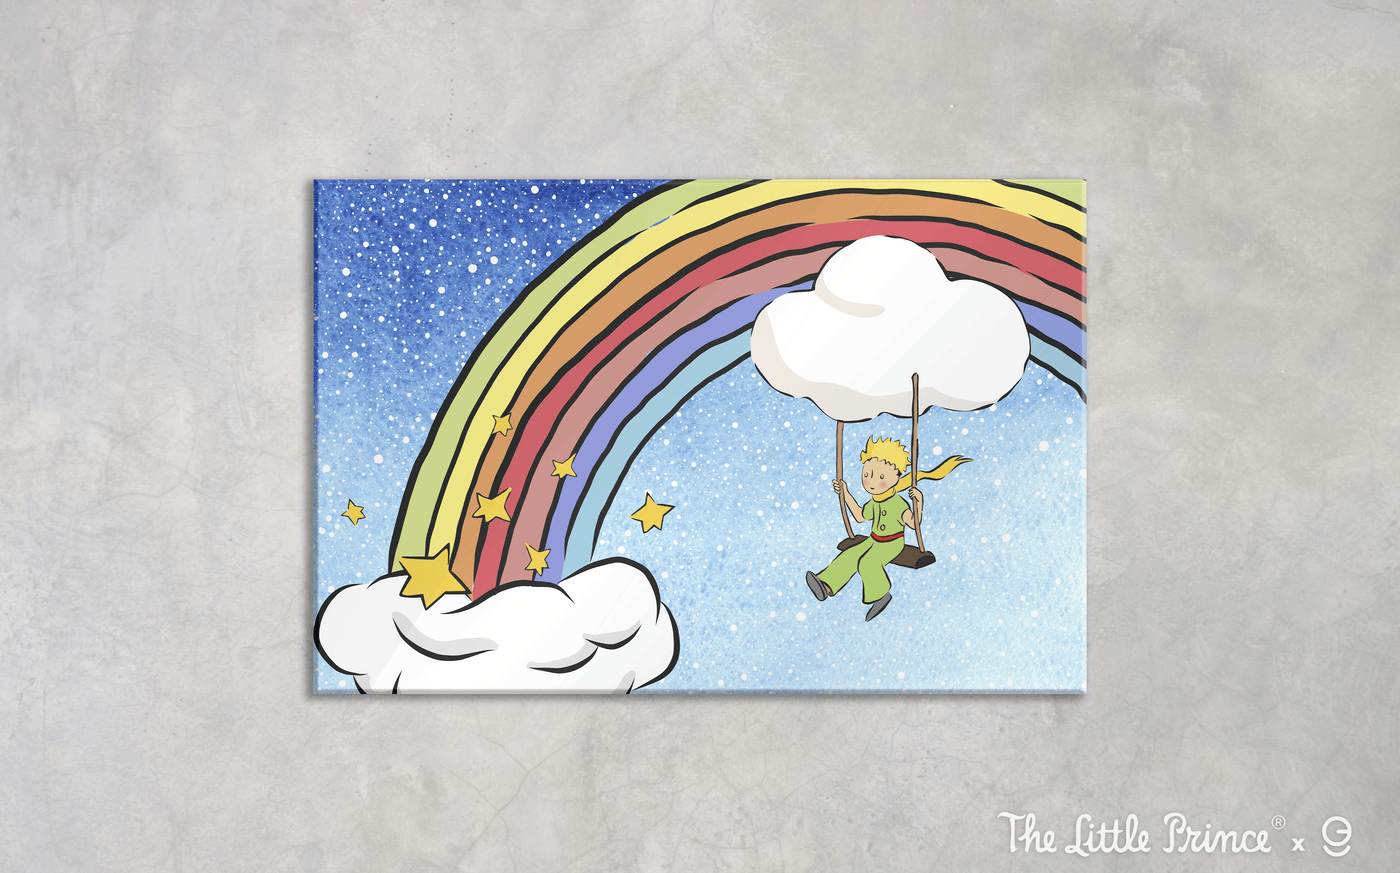 The Little Prince Acrylic Frame Modern Wall Art - EGD X The Little Prince Series - Prime Collection - Interior Design - Acrylic Wall Art - Picture Photo Printing Artwork - Multiple Size Options (EGDLP027)